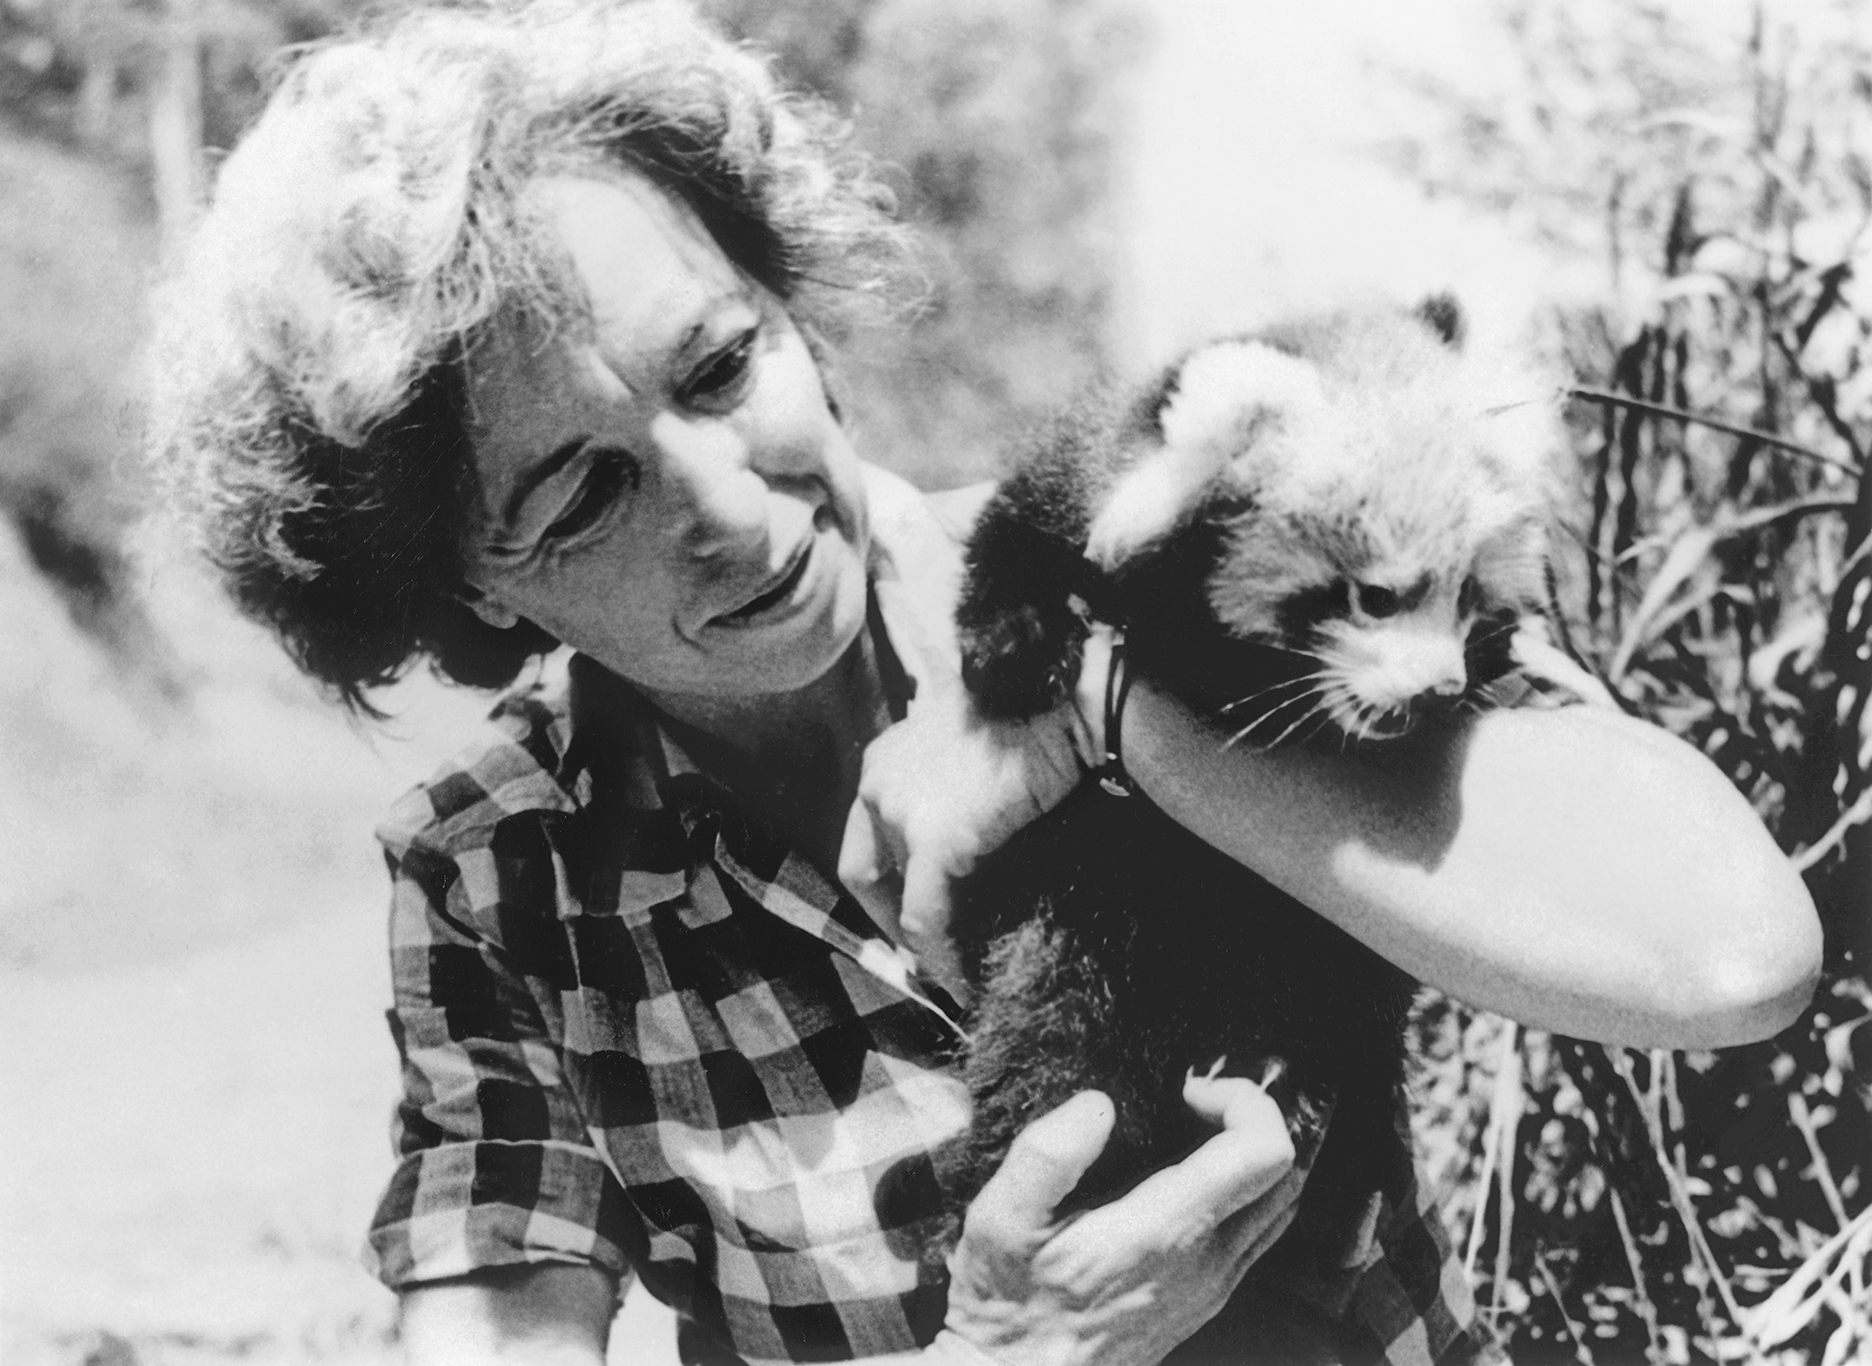 Two standouts: Georgia Dittoe, one of only a very few female zookeepers, says hello to one of the Zoo's first red pandas, a very rare species in zoos at the time.